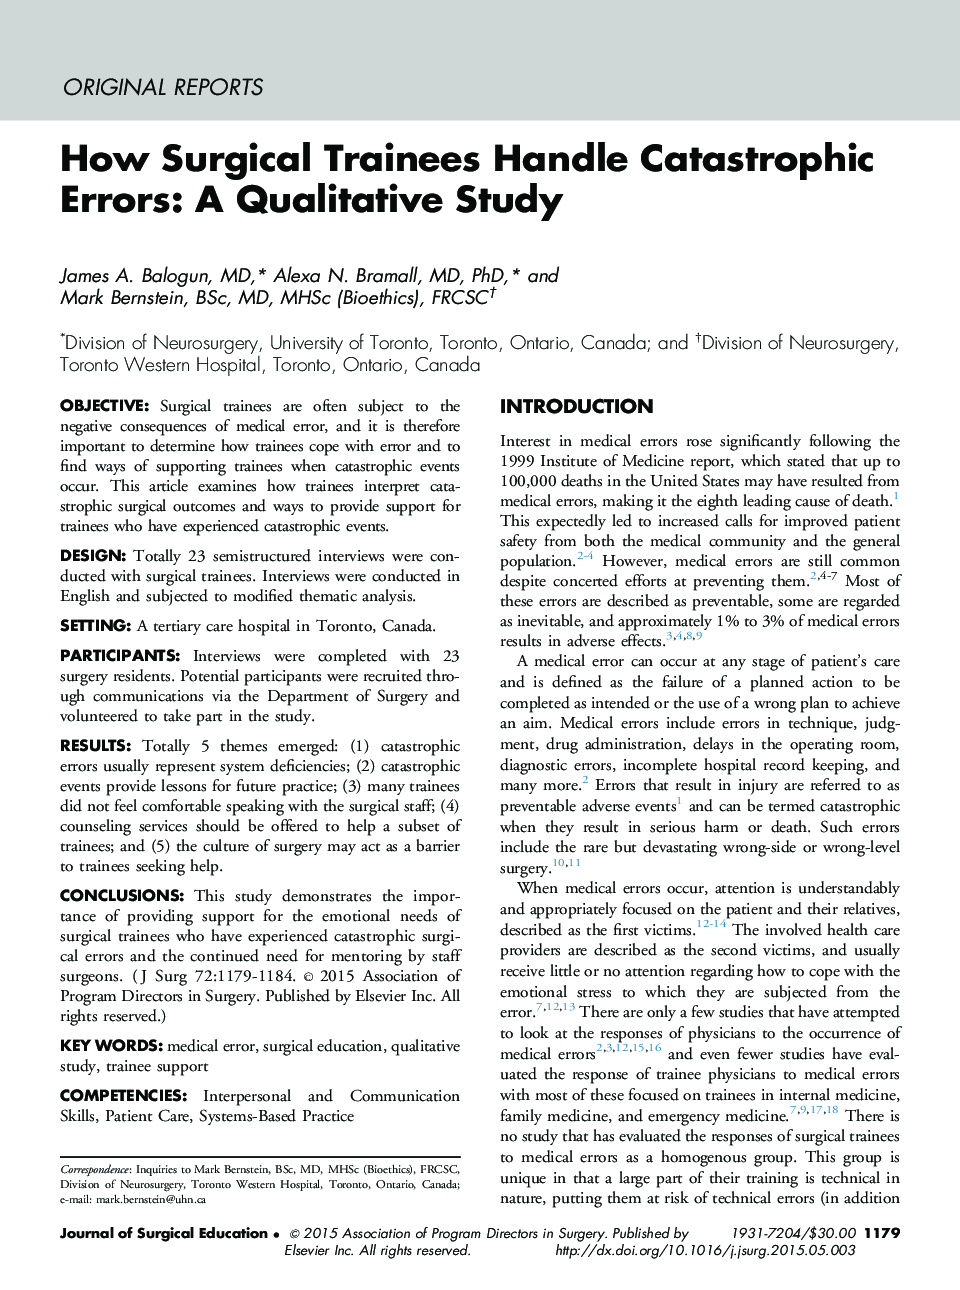 How Surgical Trainees Handle Catastrophic Errors: A Qualitative Study